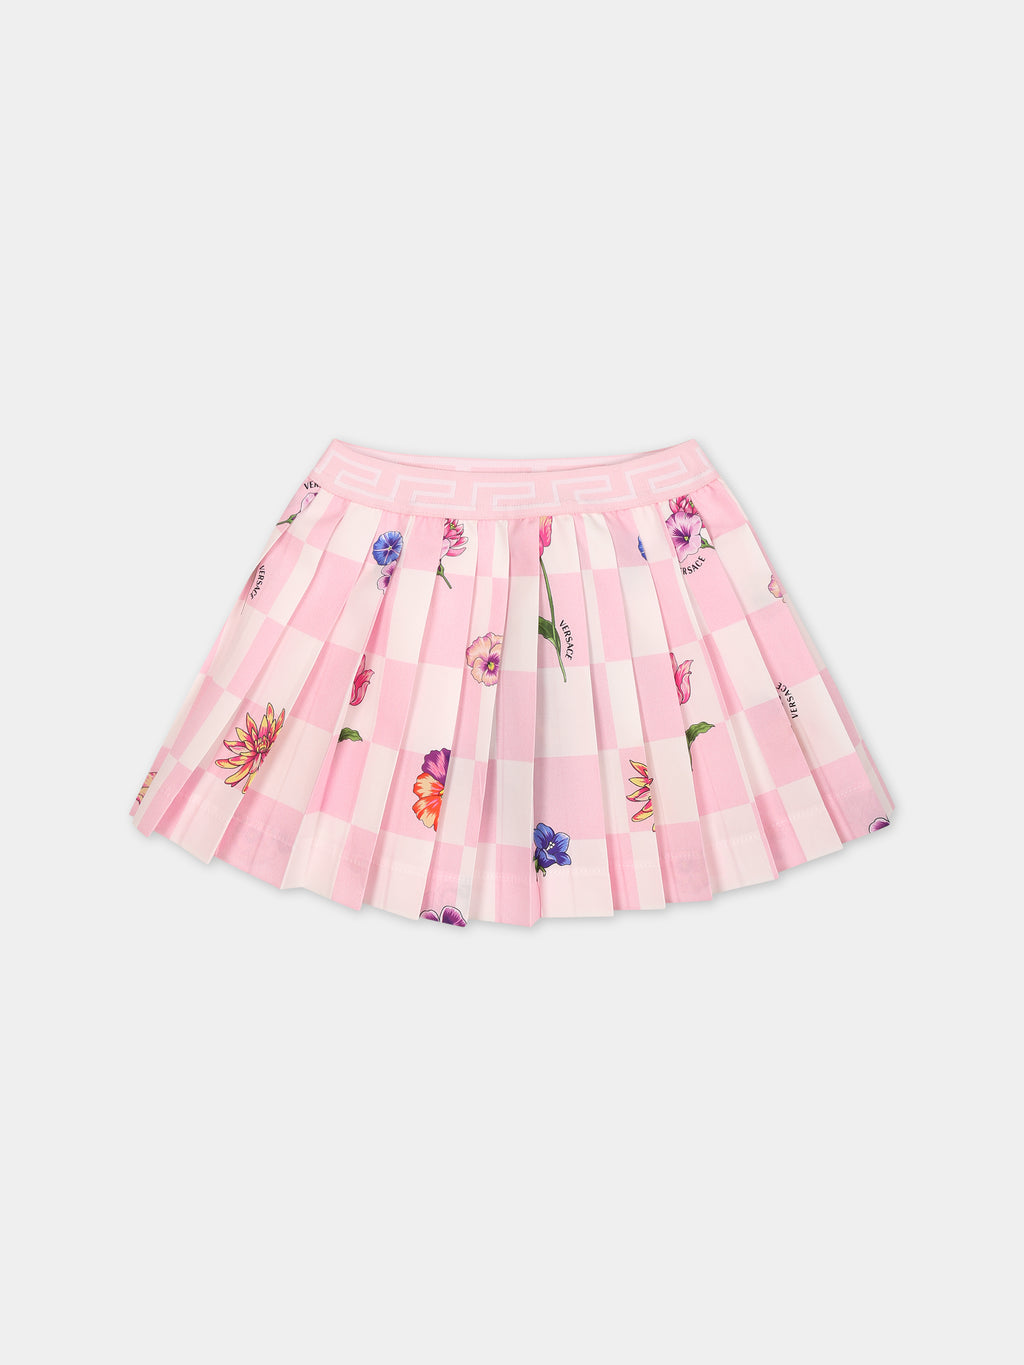 Pink skirt for baby girl with flower print